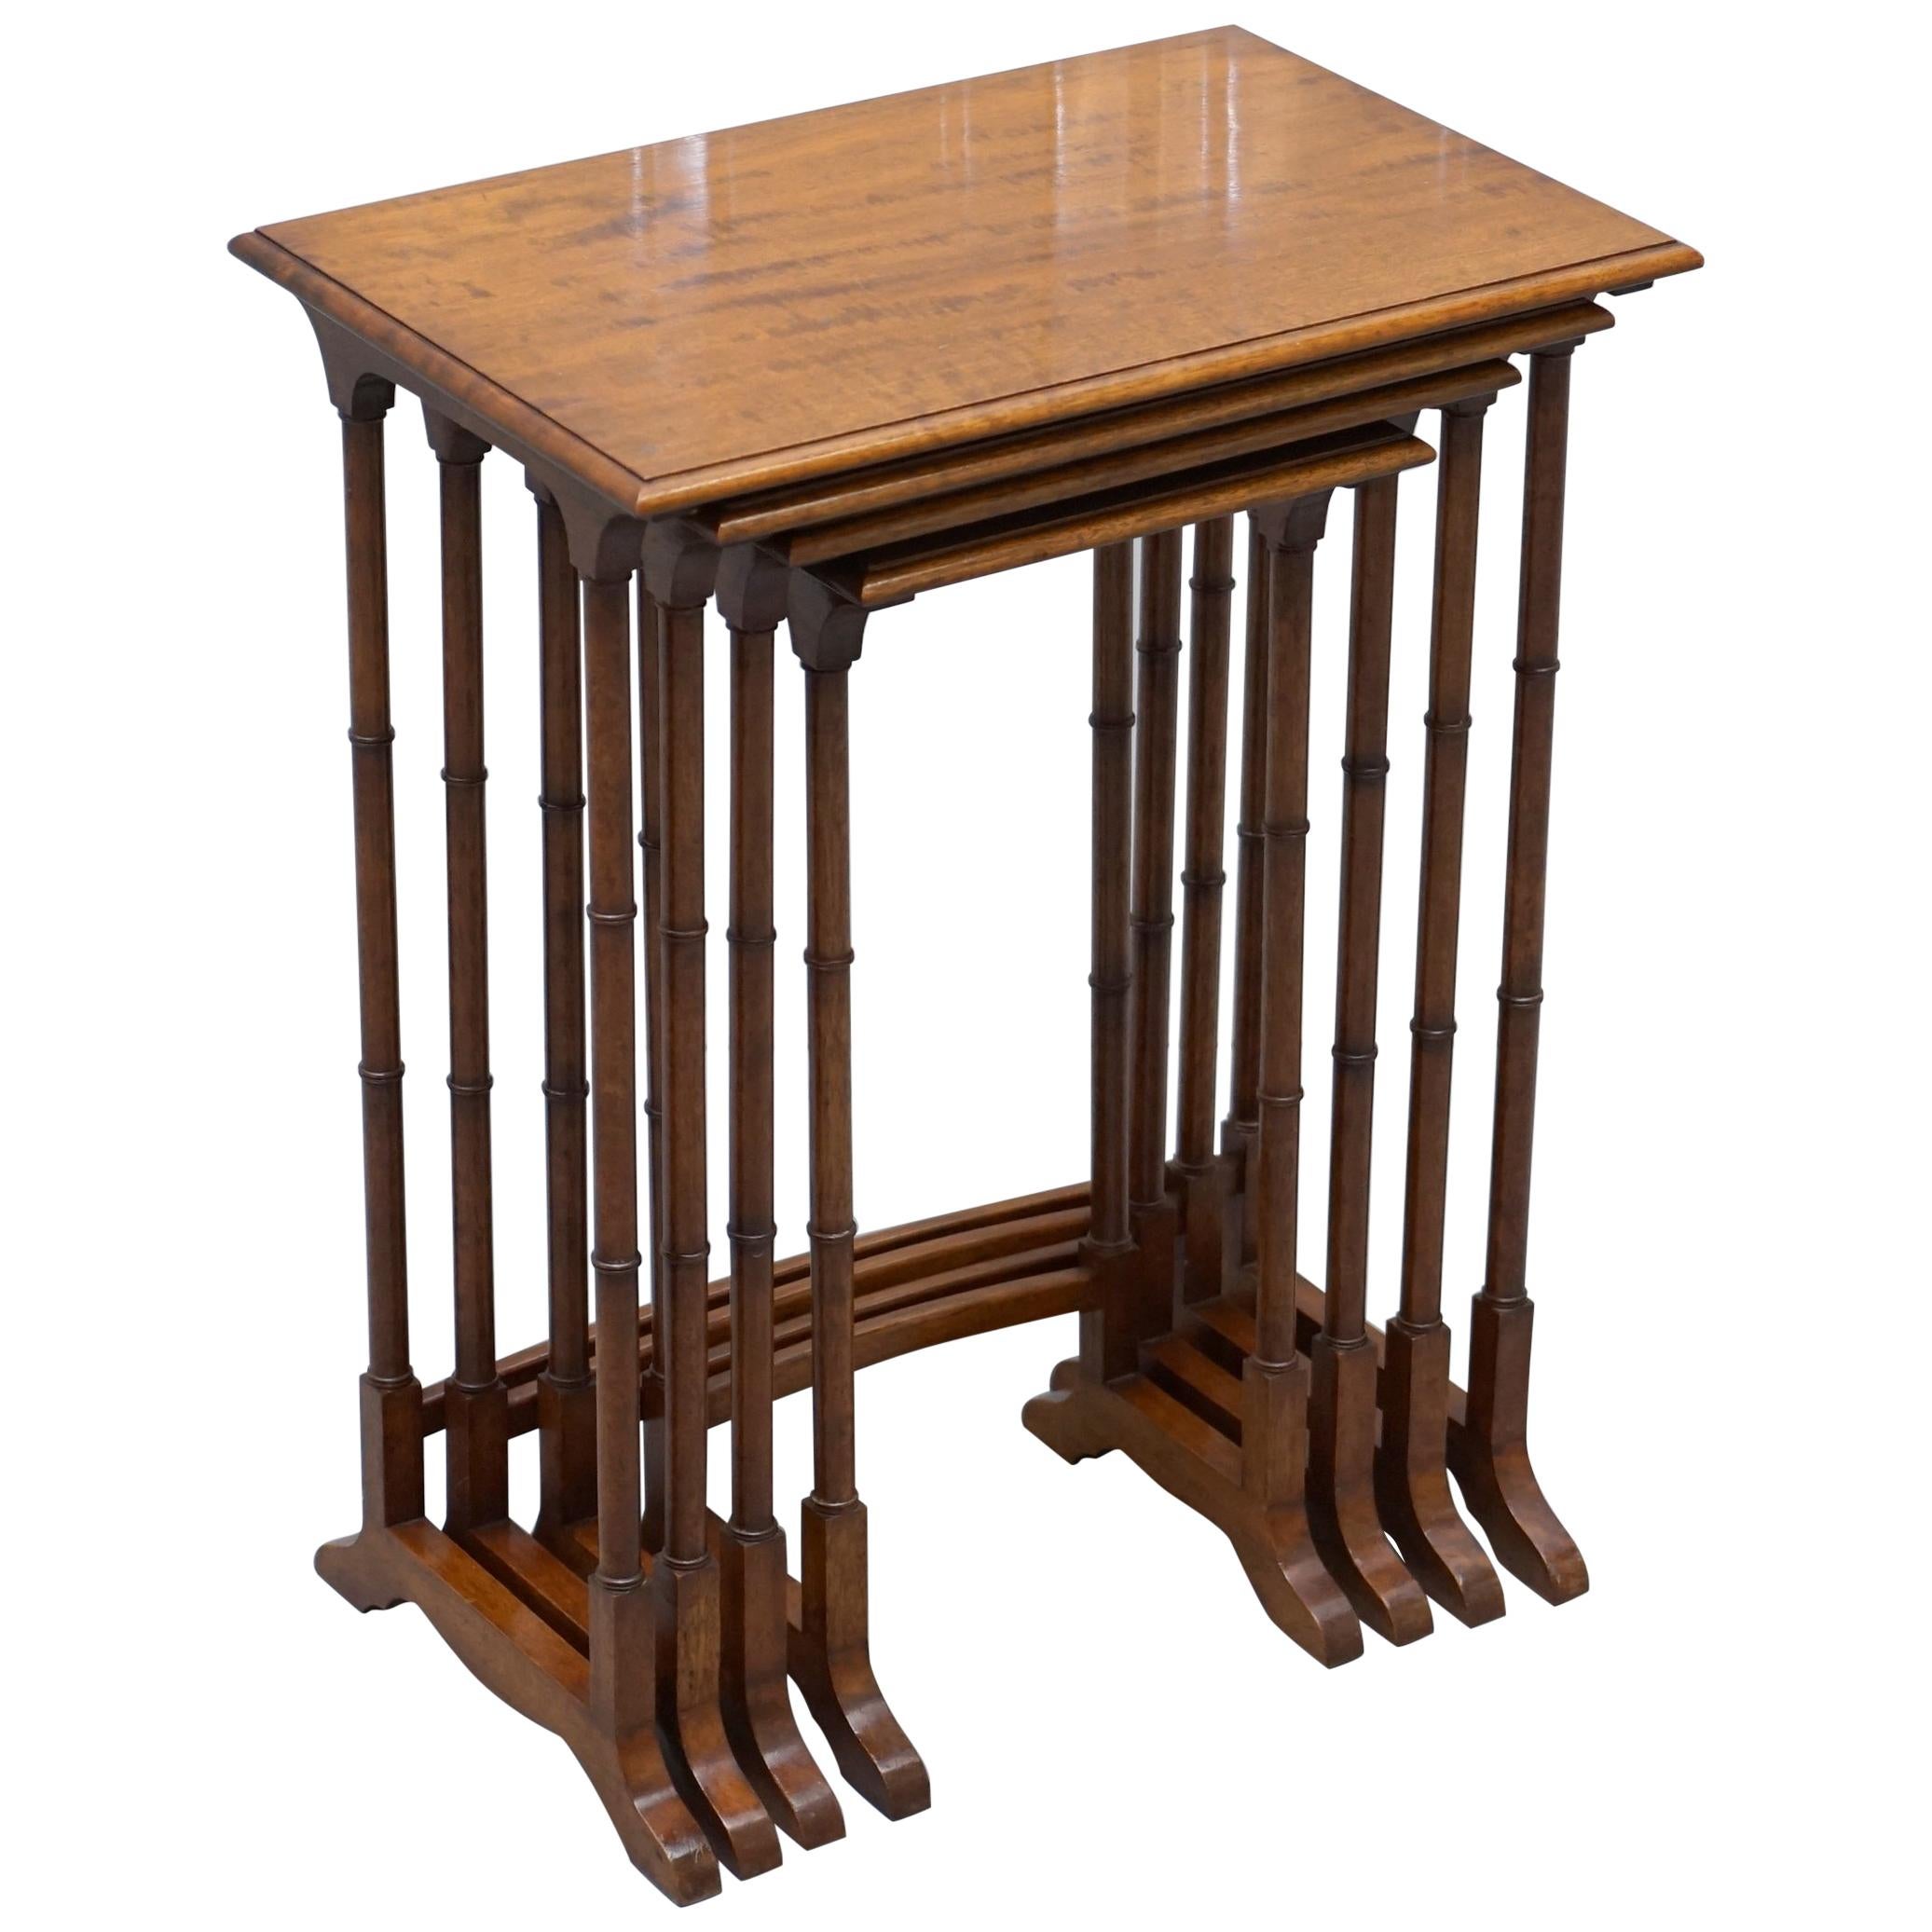 Stunning Nest of Four Georgian Nesting Tables Side Tables with Famboo Legs